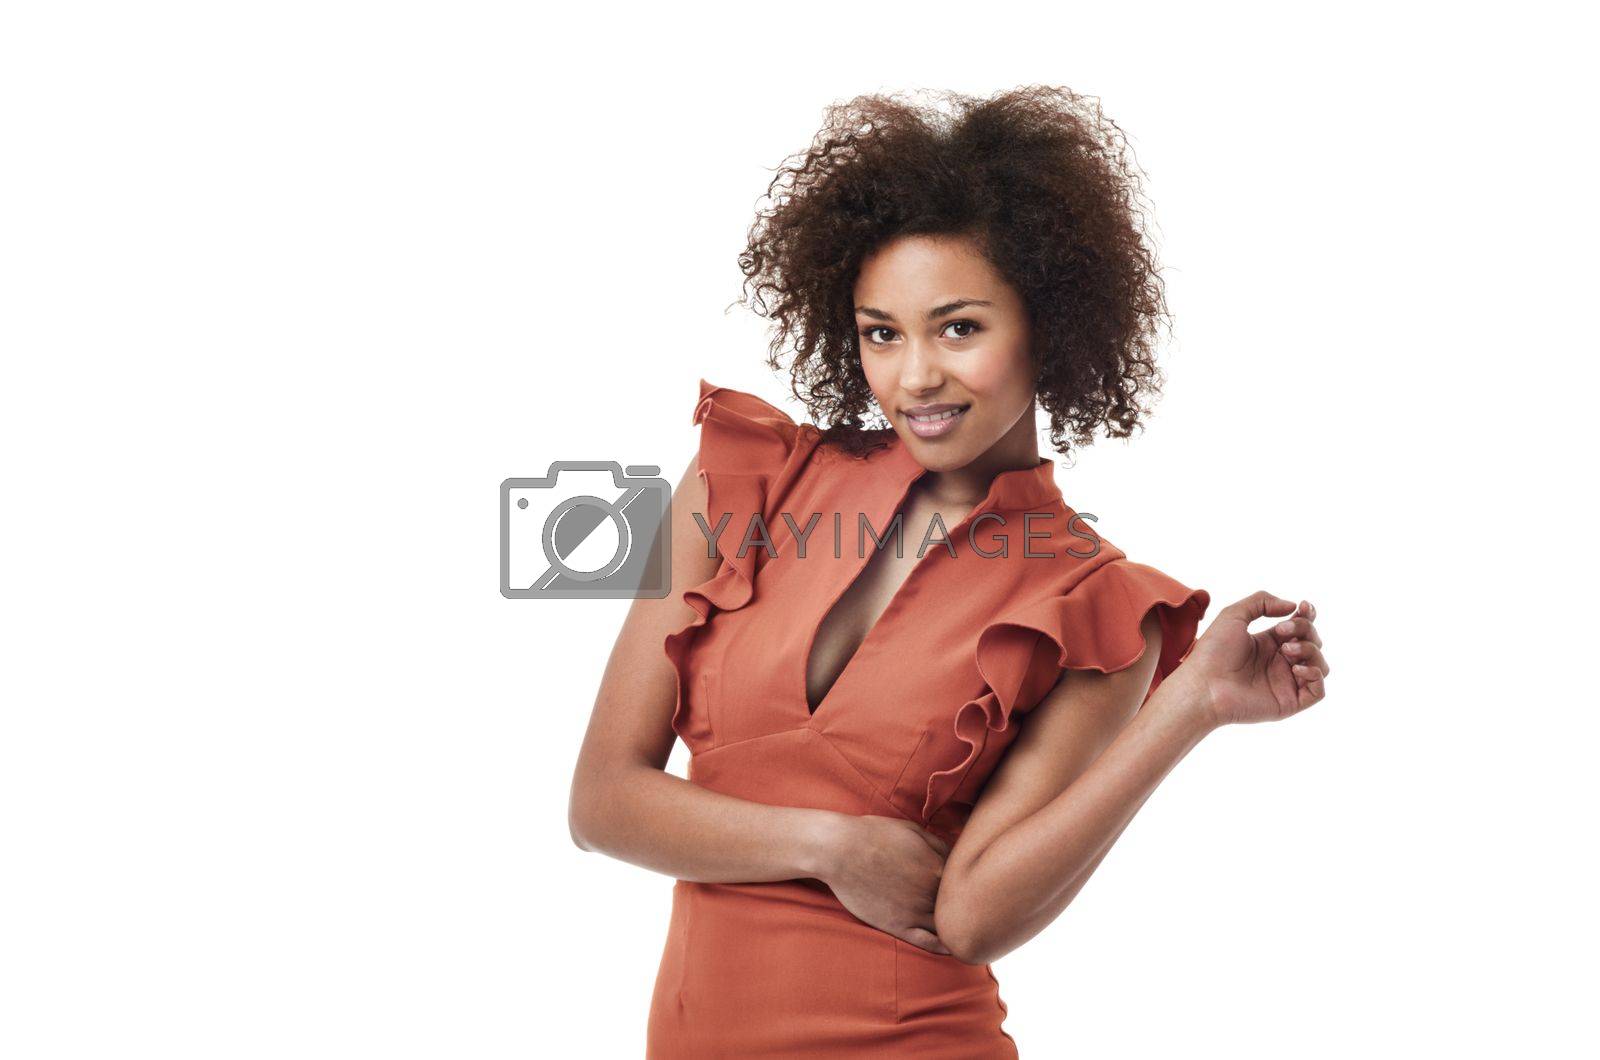 Royalty free image of Sassy and cool. A gorgeous ethnic woman with a sassy attitude smiling at the camera. by YuriArcurs